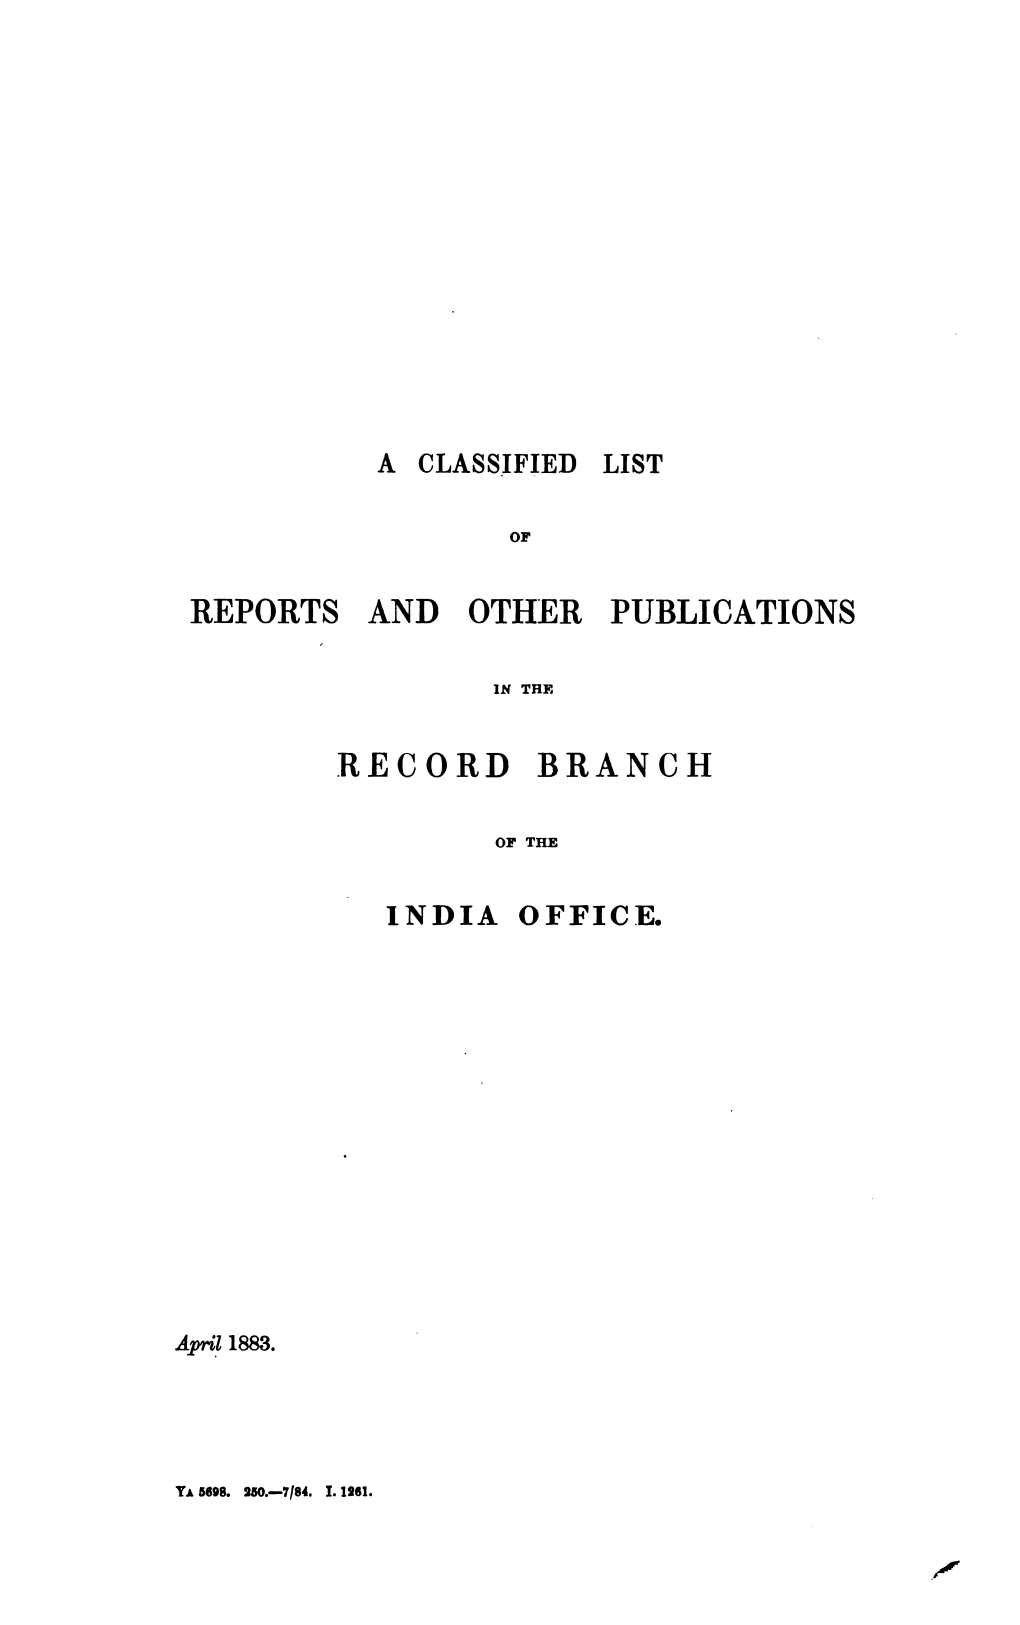 A Classified List of Reports and Other Publications in the Record Branch